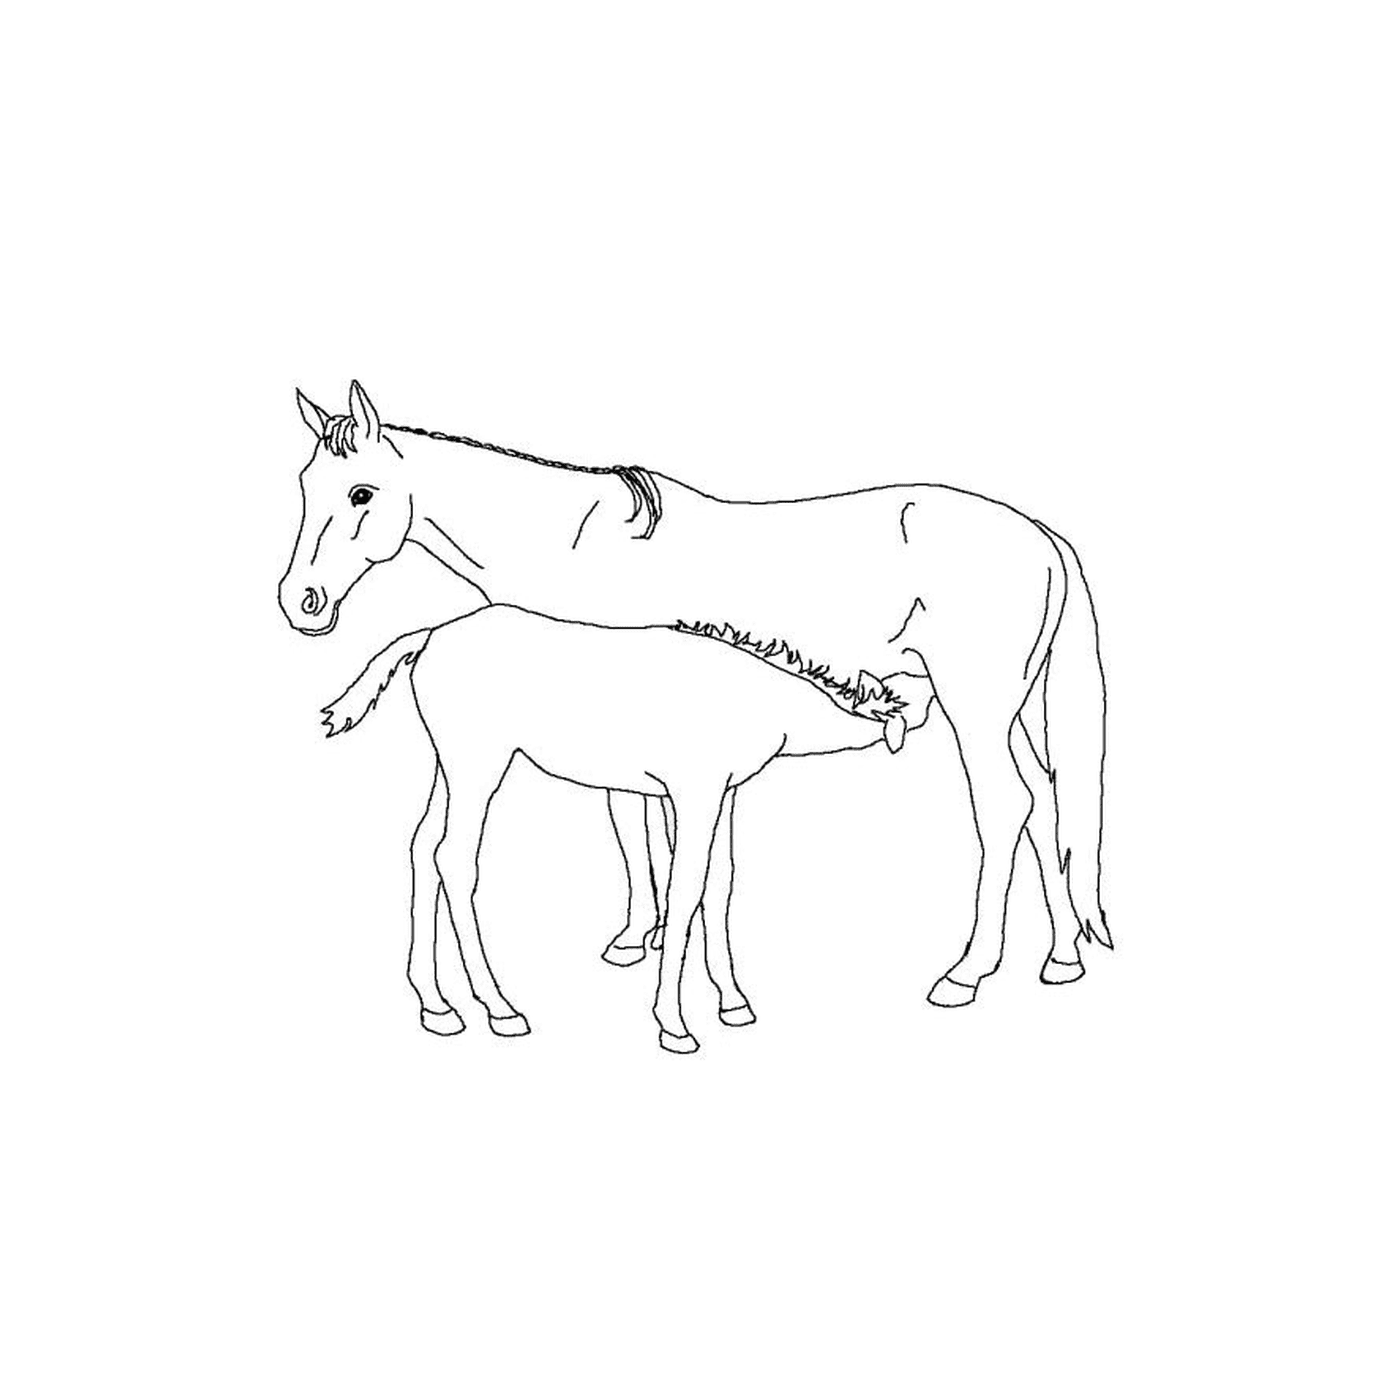  Poultry Horses - A horse and a foal side by side 